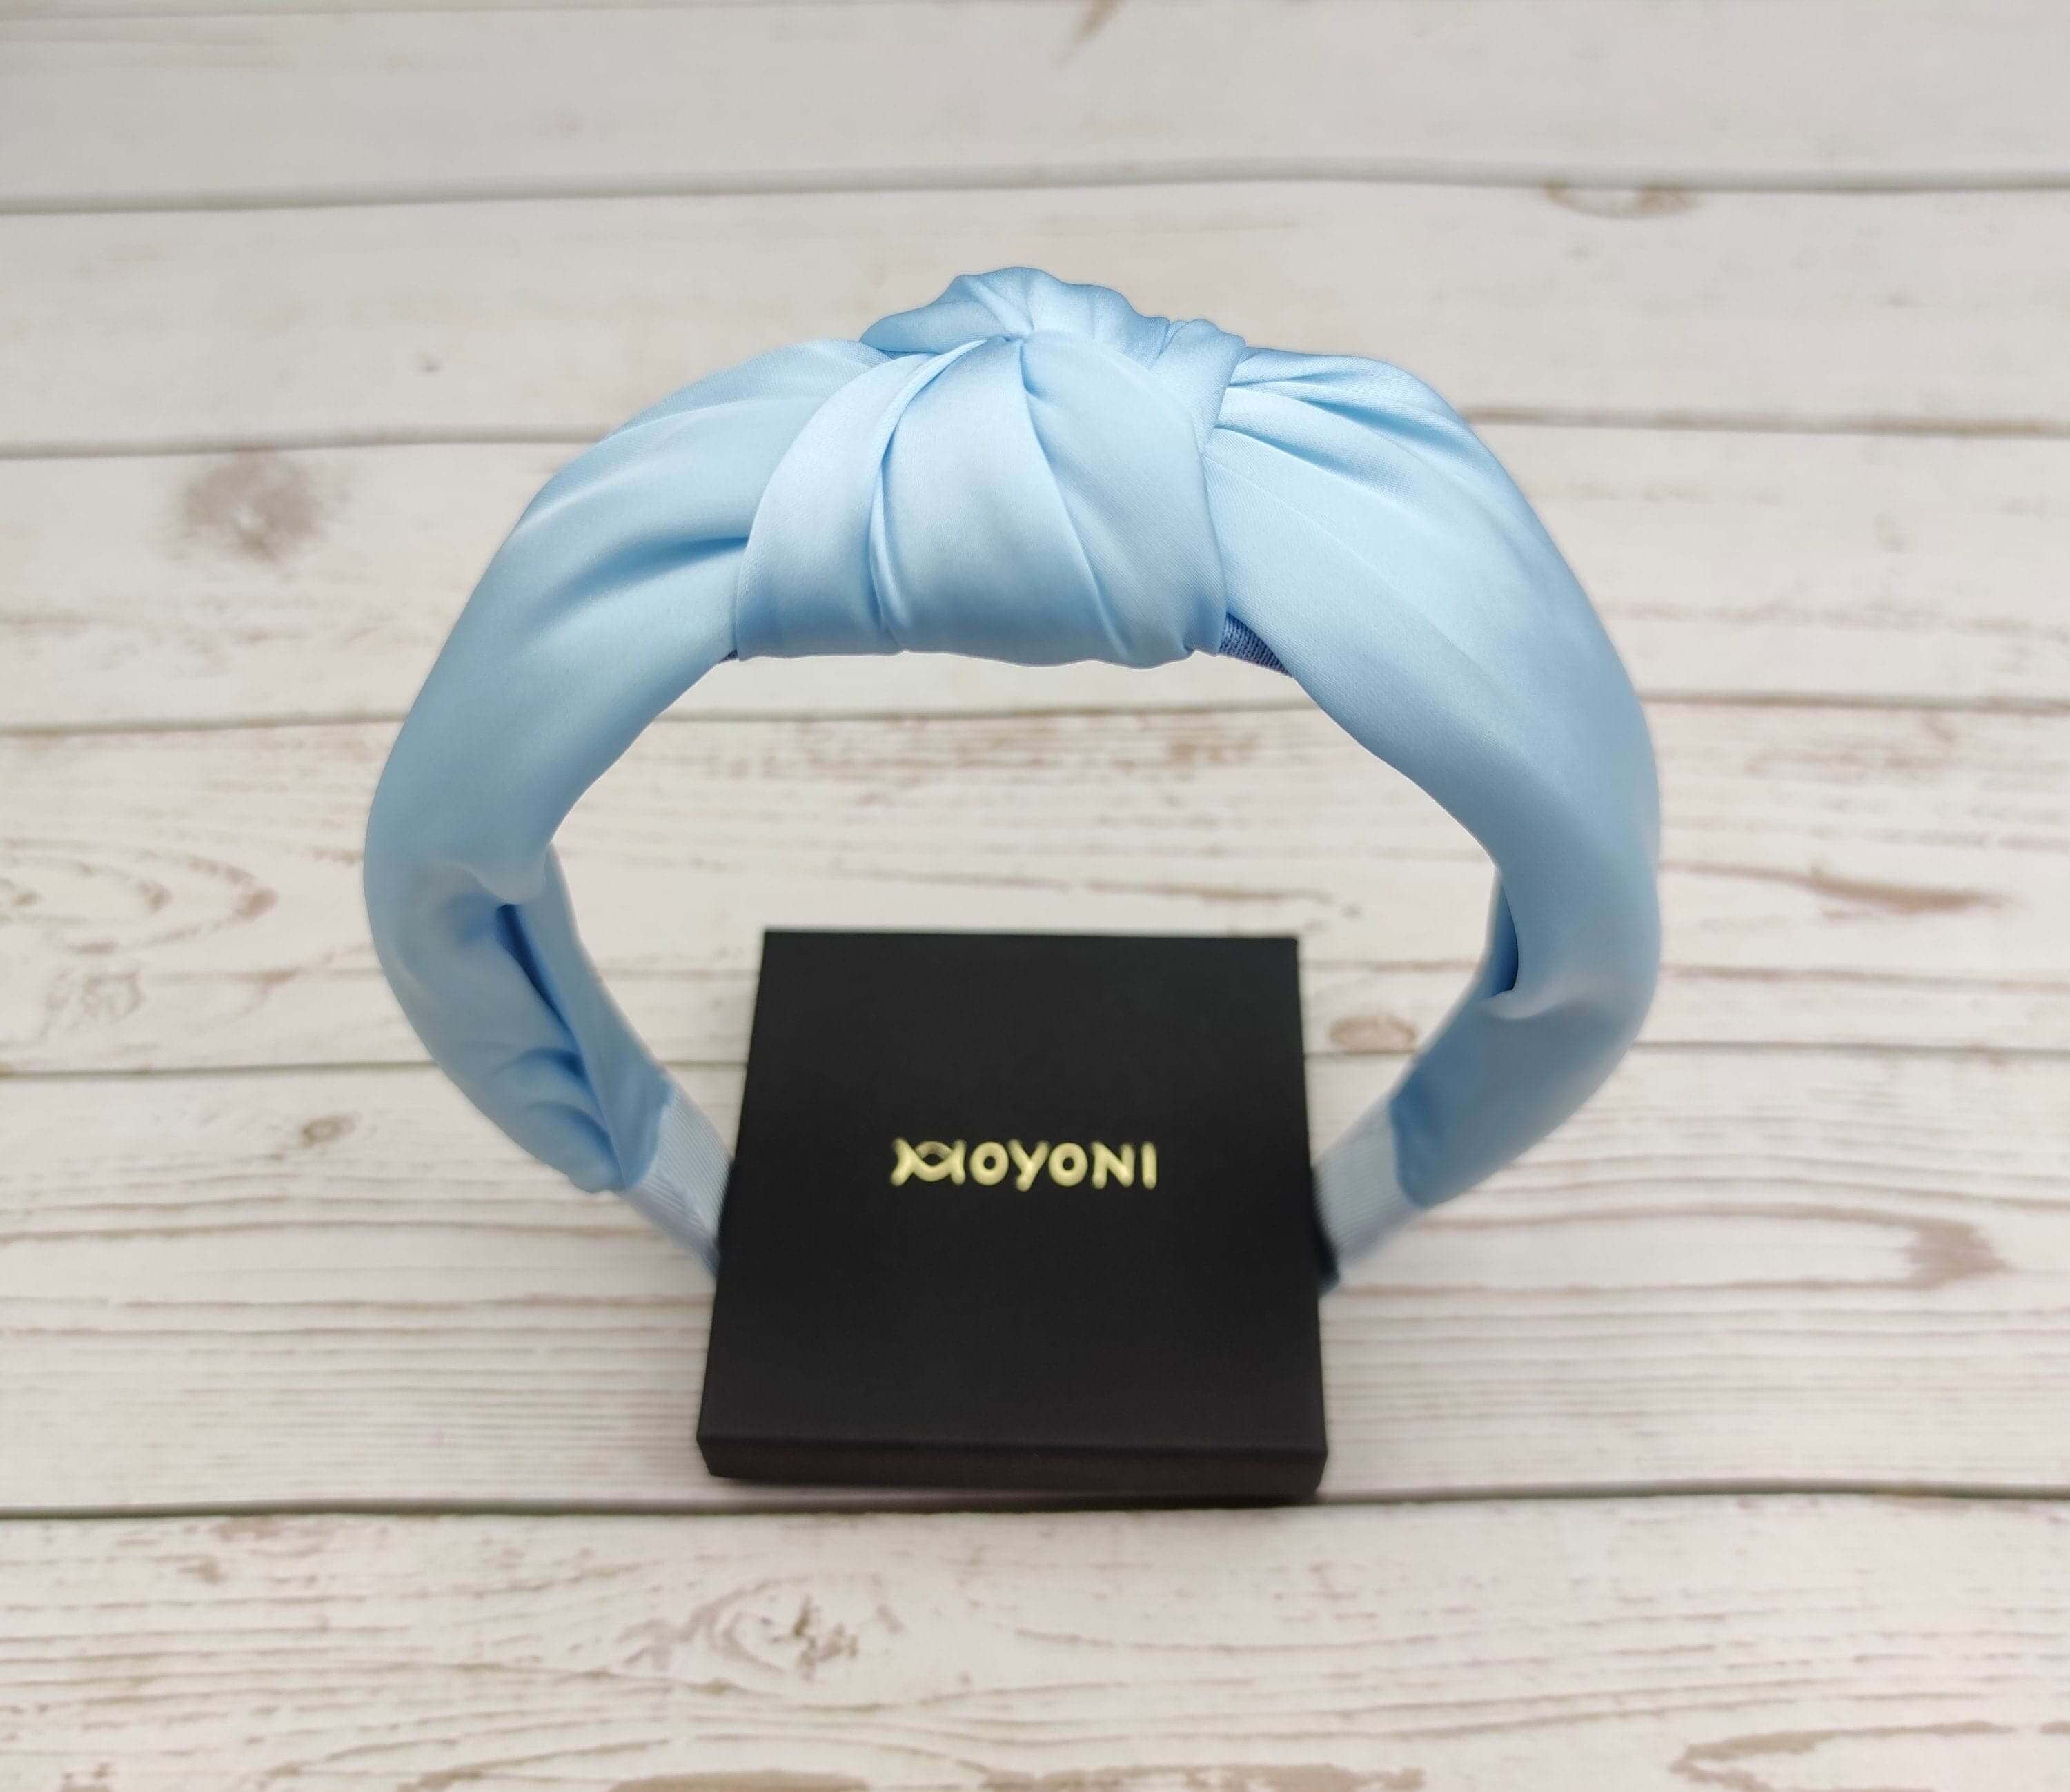 Accessorize your look with these stylish headbands. Made from soft and comfortable fabric, these headbands will keep your hair in place all day long.